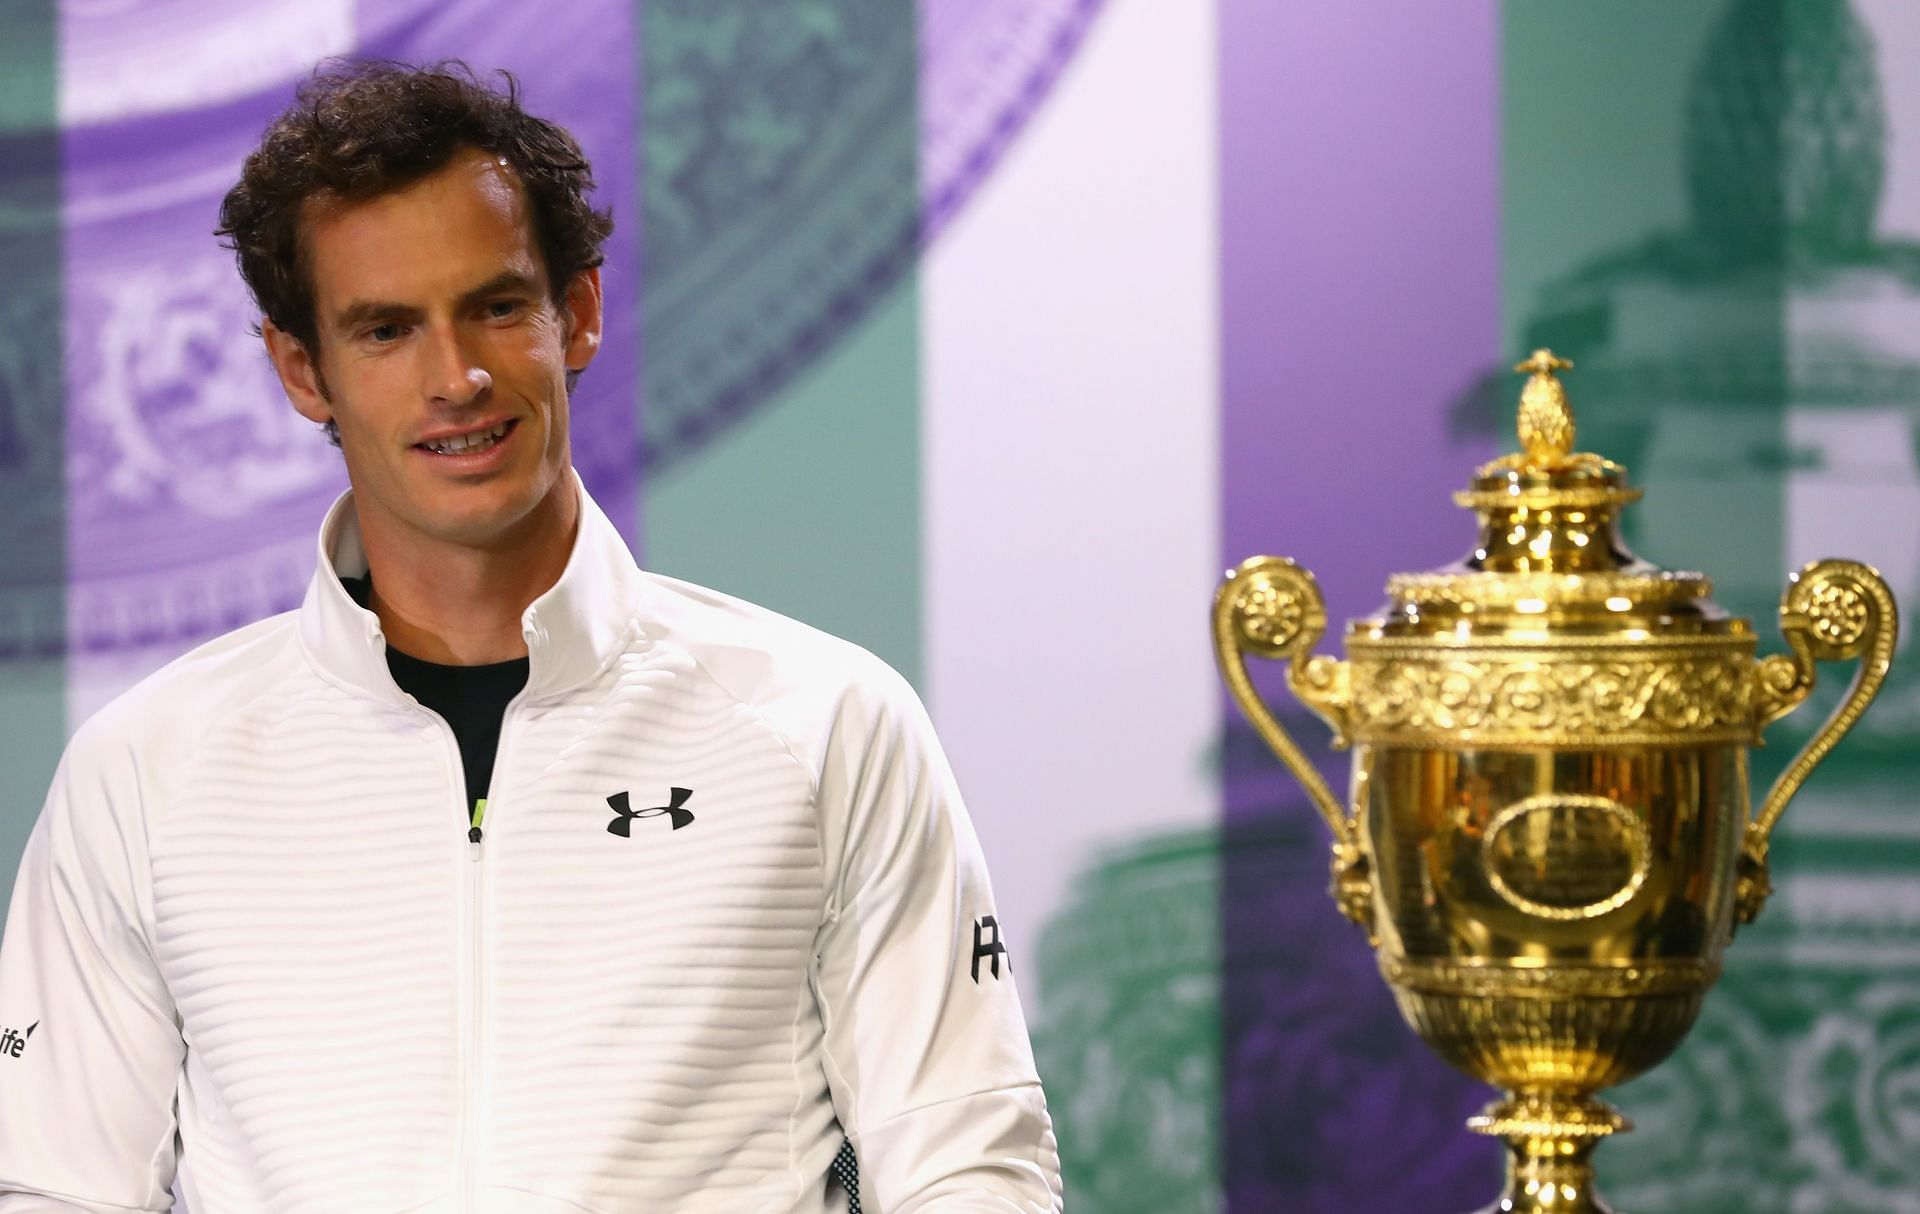 Andy Murray won the Wimbledon title in 2013 and 2016